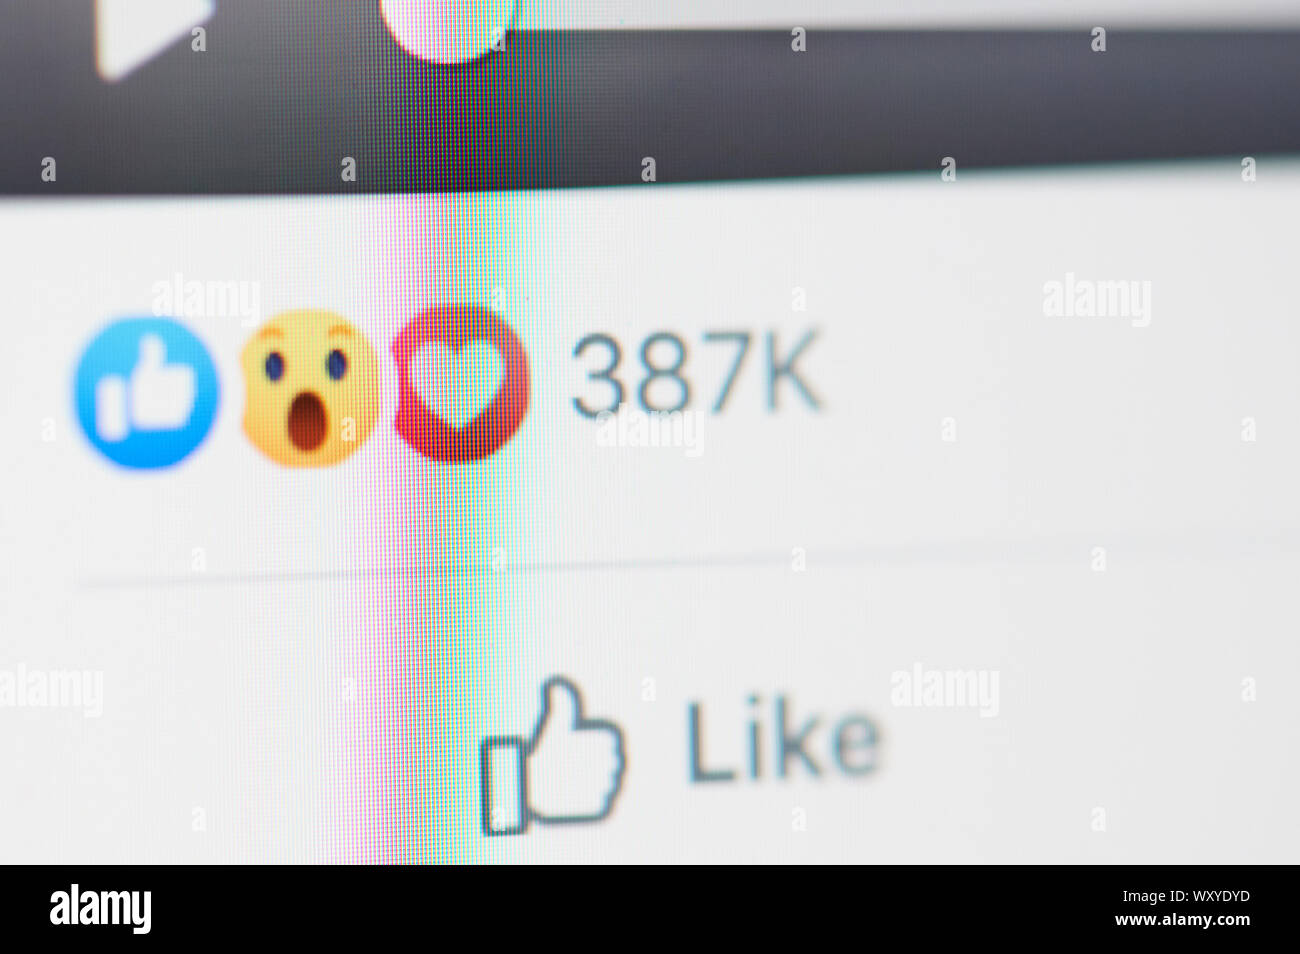 New york, USA - september 18, 2019: Facebook likes reaction on laptop screen close up view Stock Photo